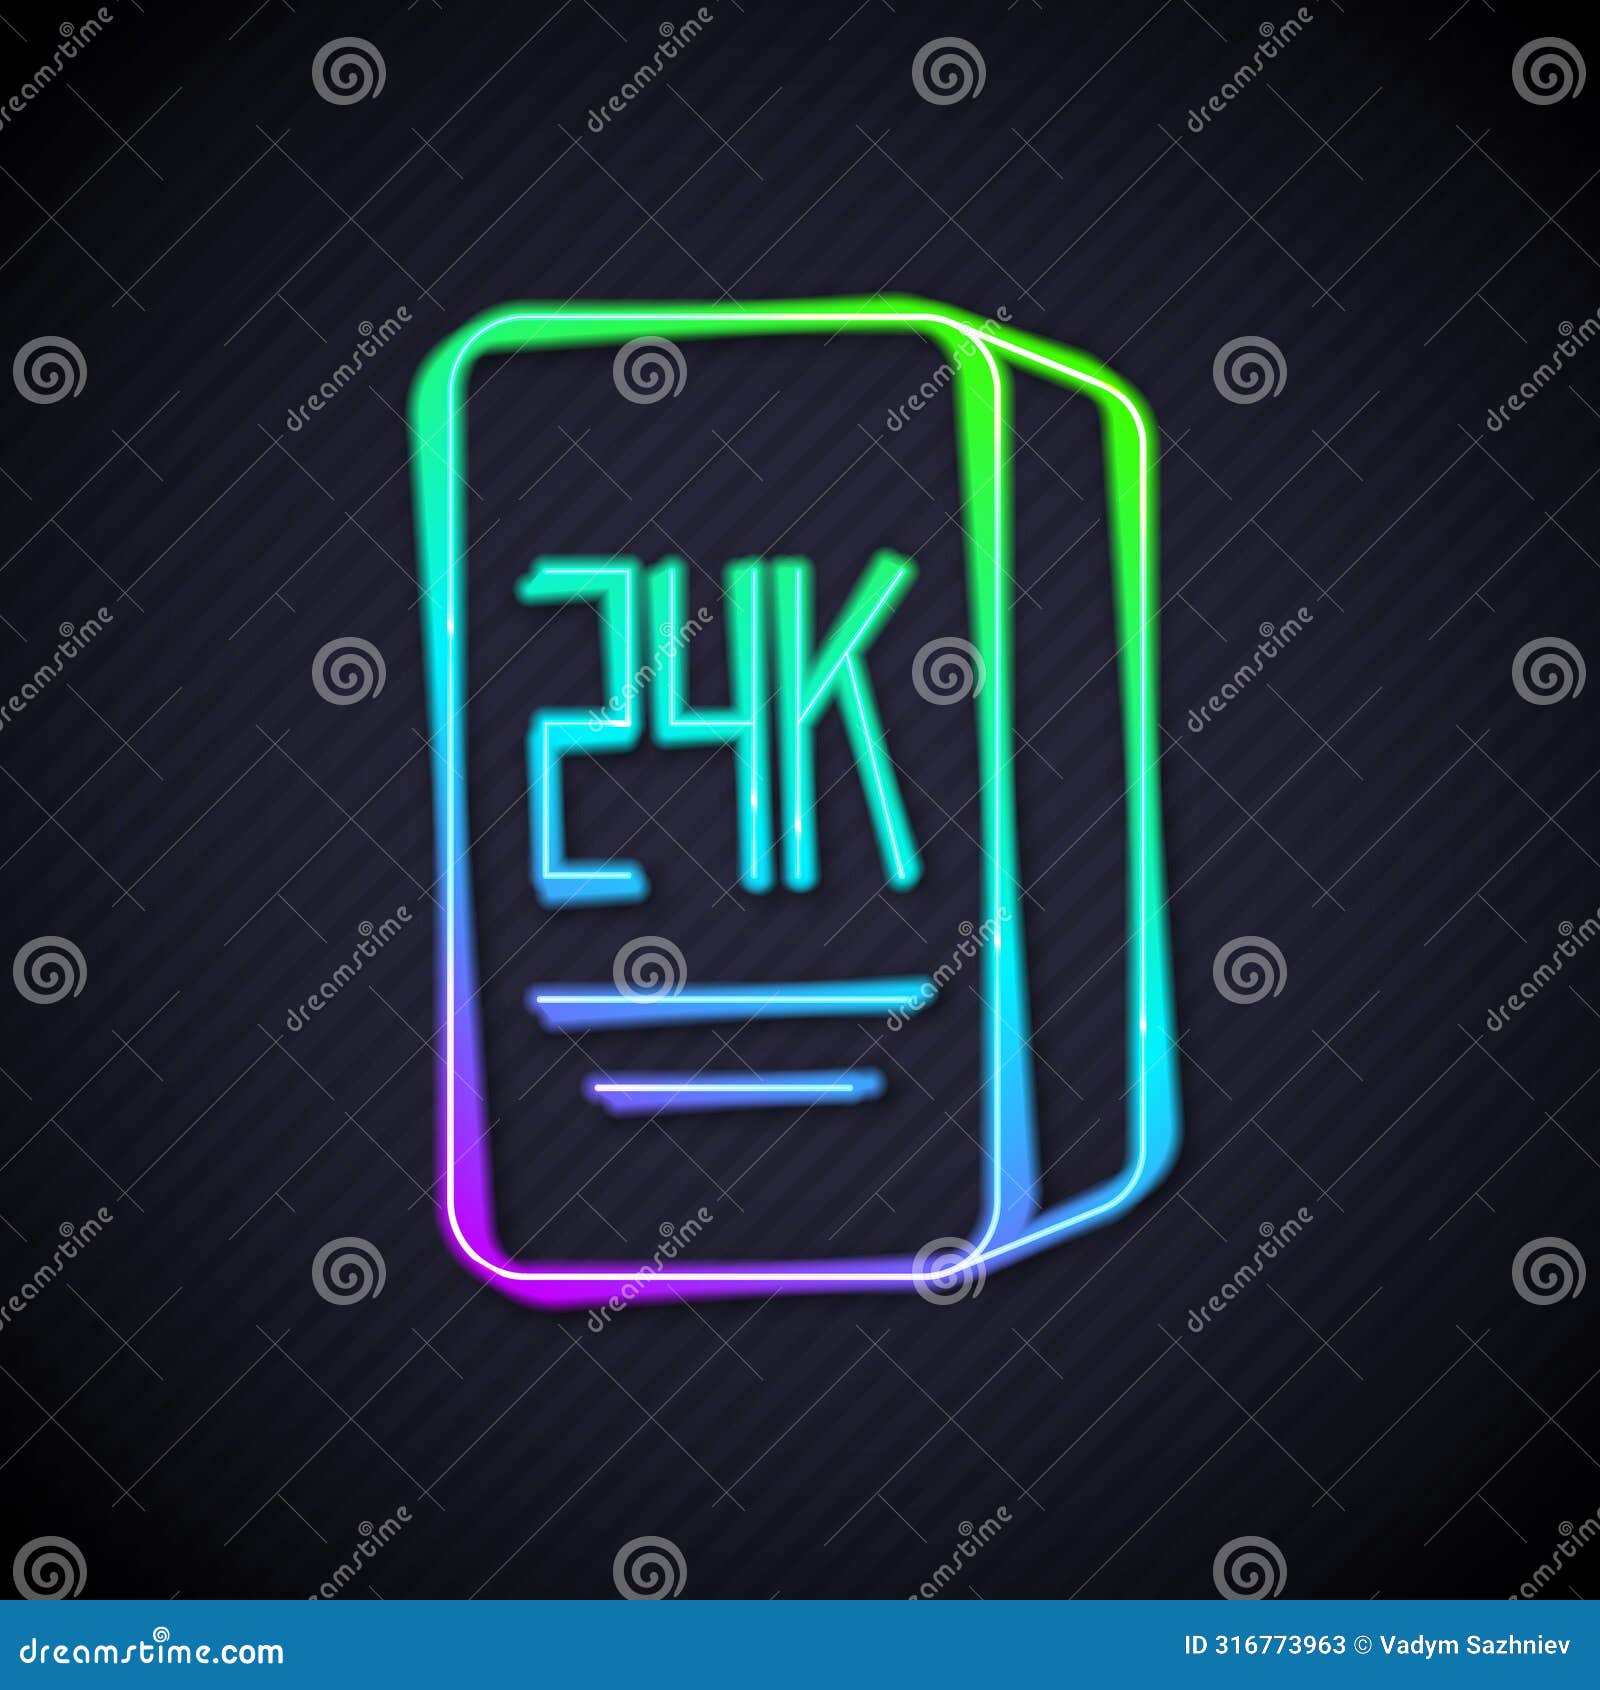 glowing neon line gold bars 24k icon  on black background. banking business concept. 